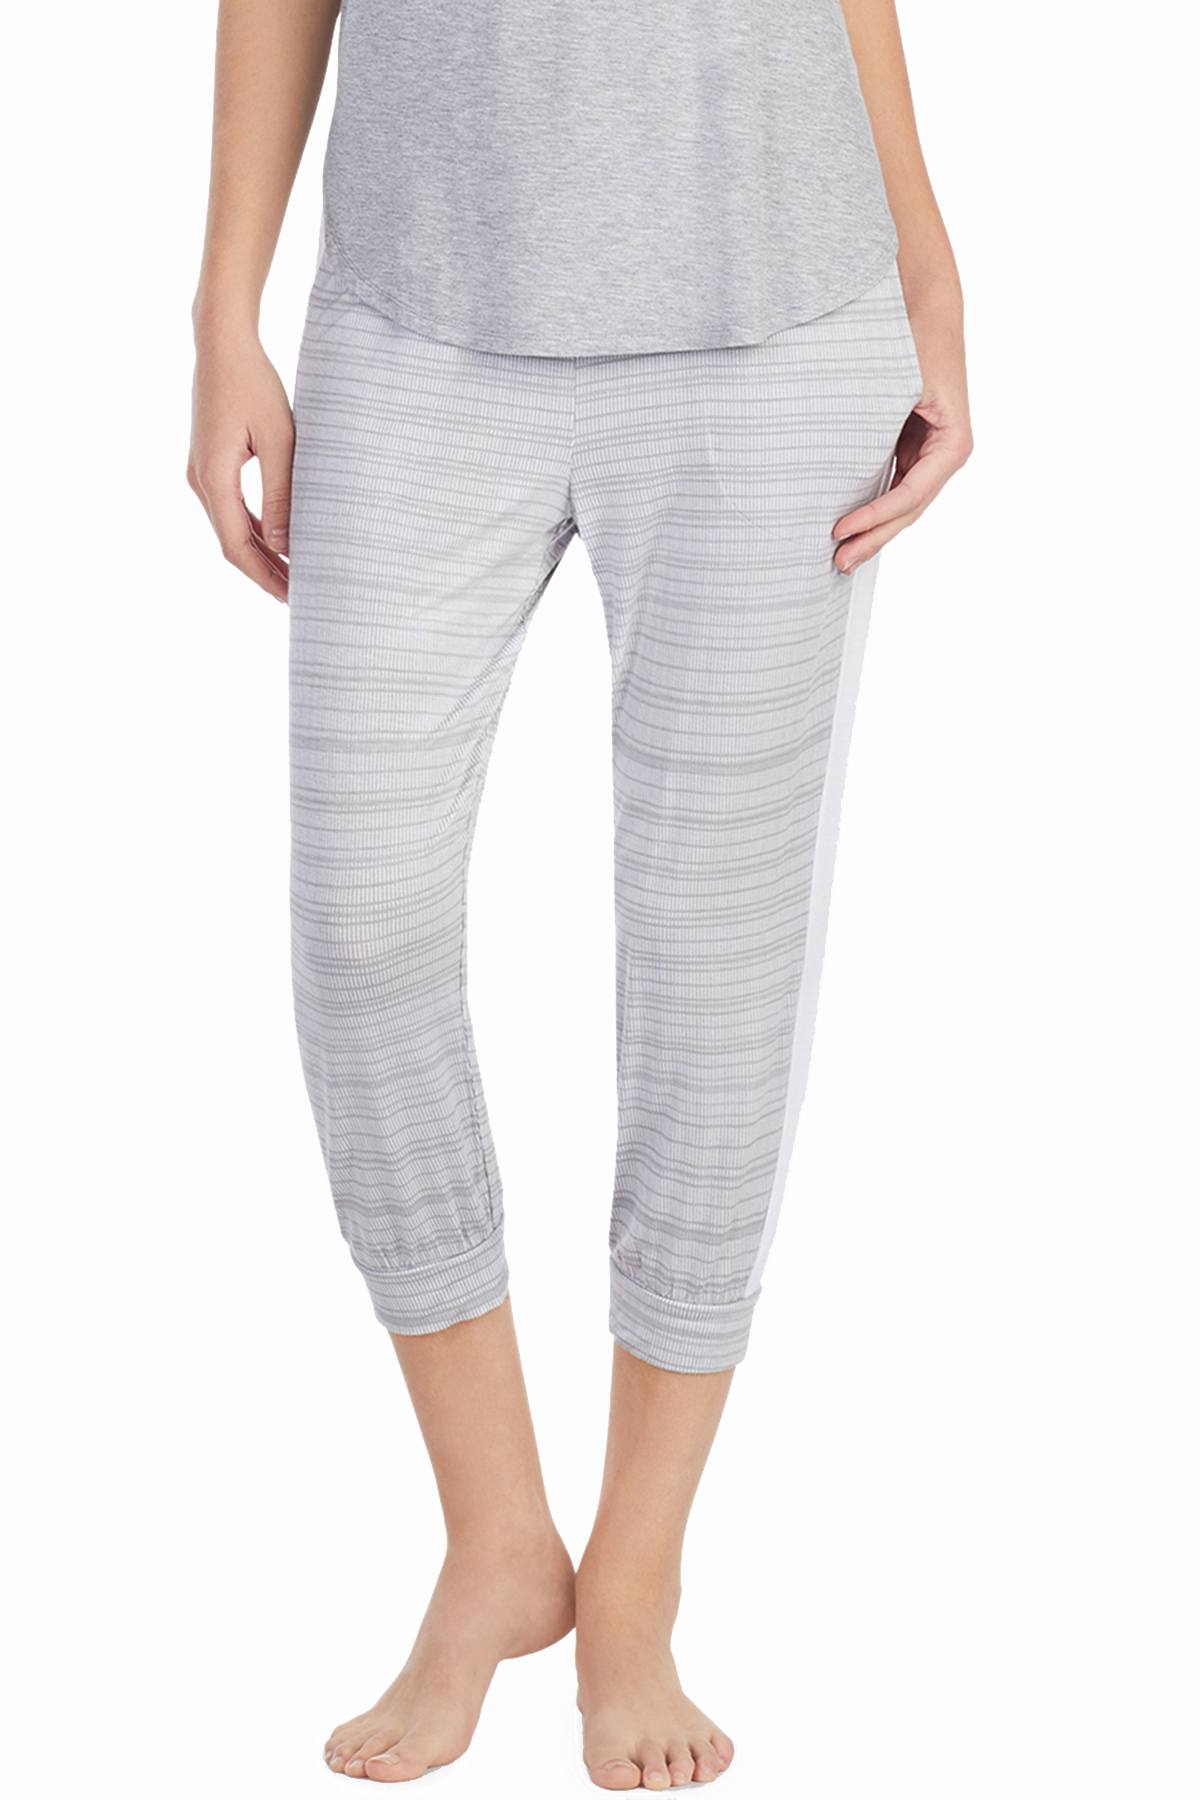 DKNY Yellow/Grey-Printed Contrast-Band Cropped Lounge Pant